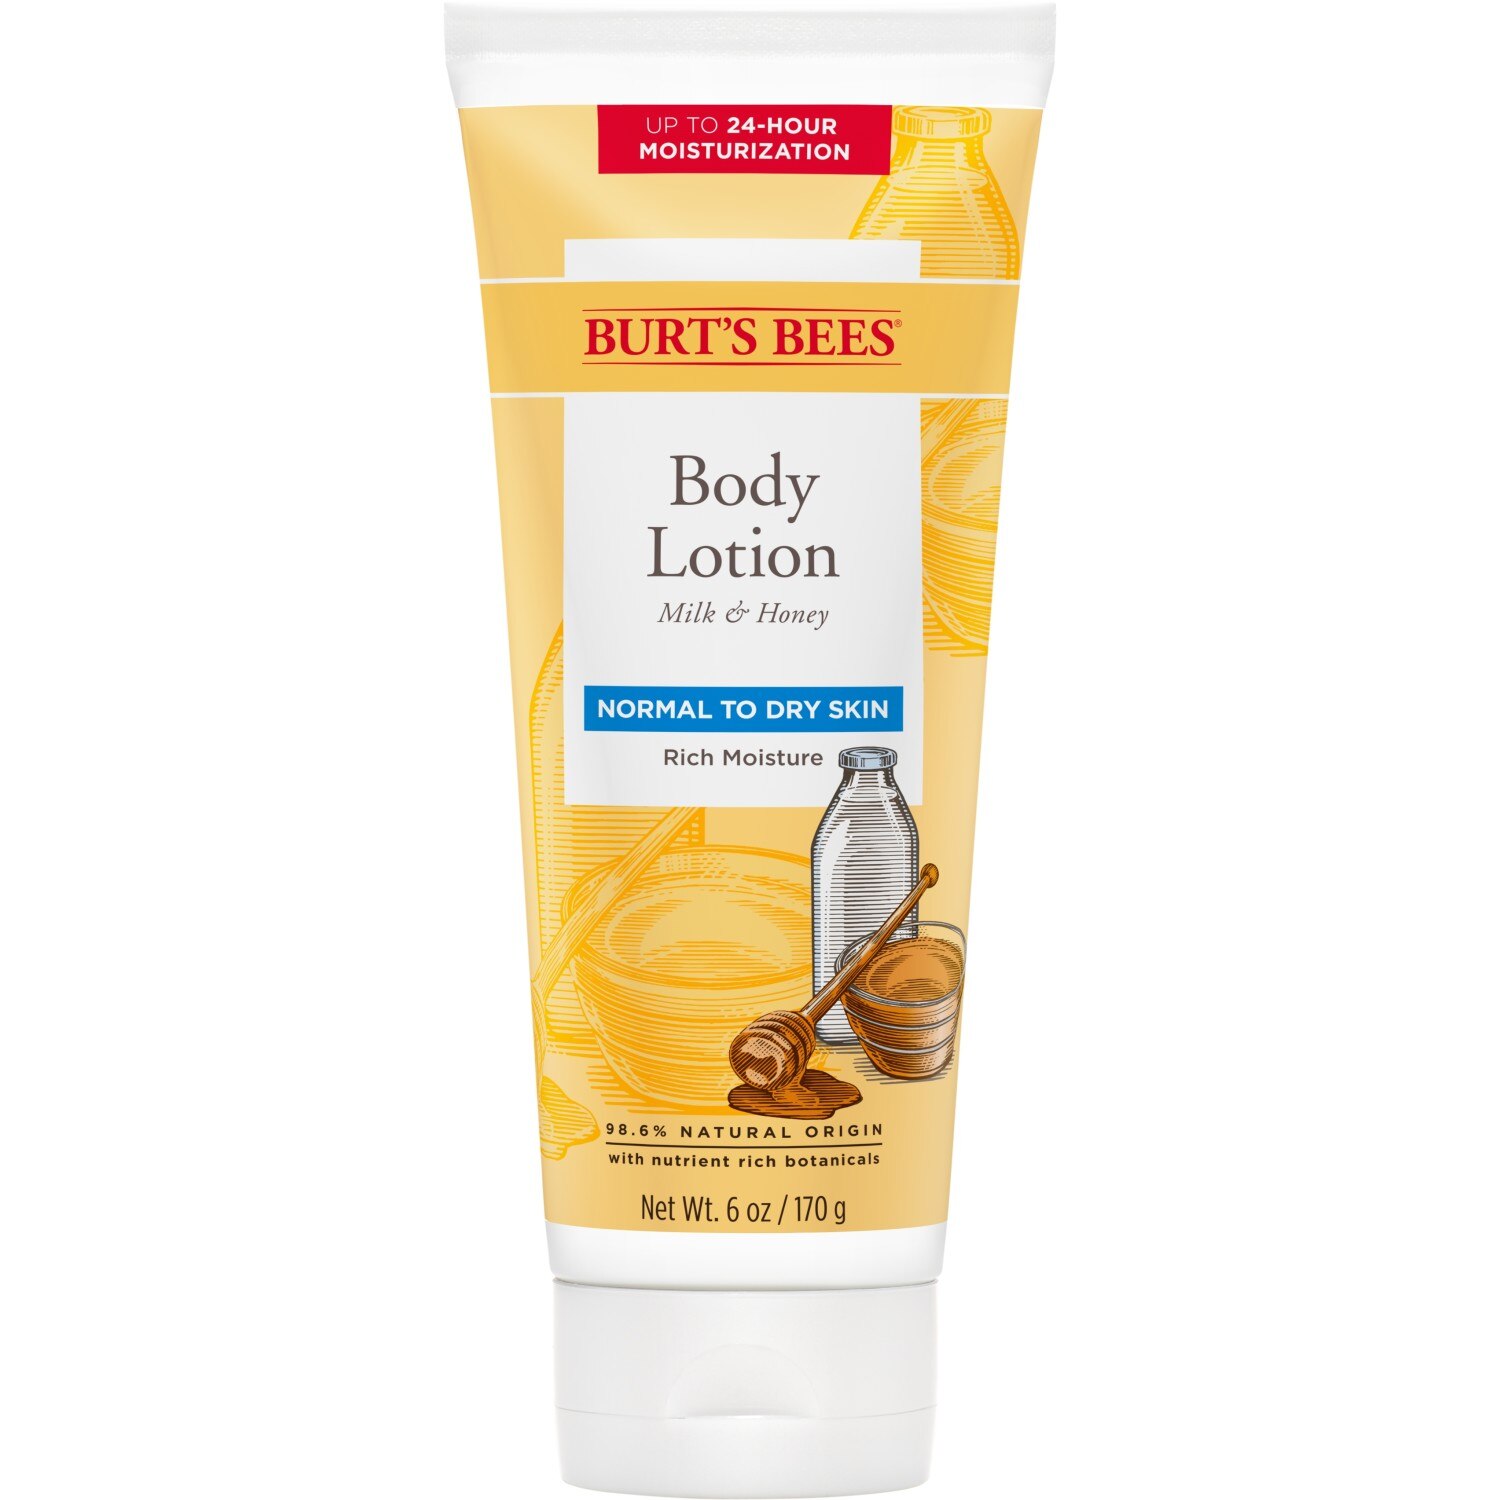 Burt's Bees Body Lotion, Normal to Dry Skin, 6 OZ